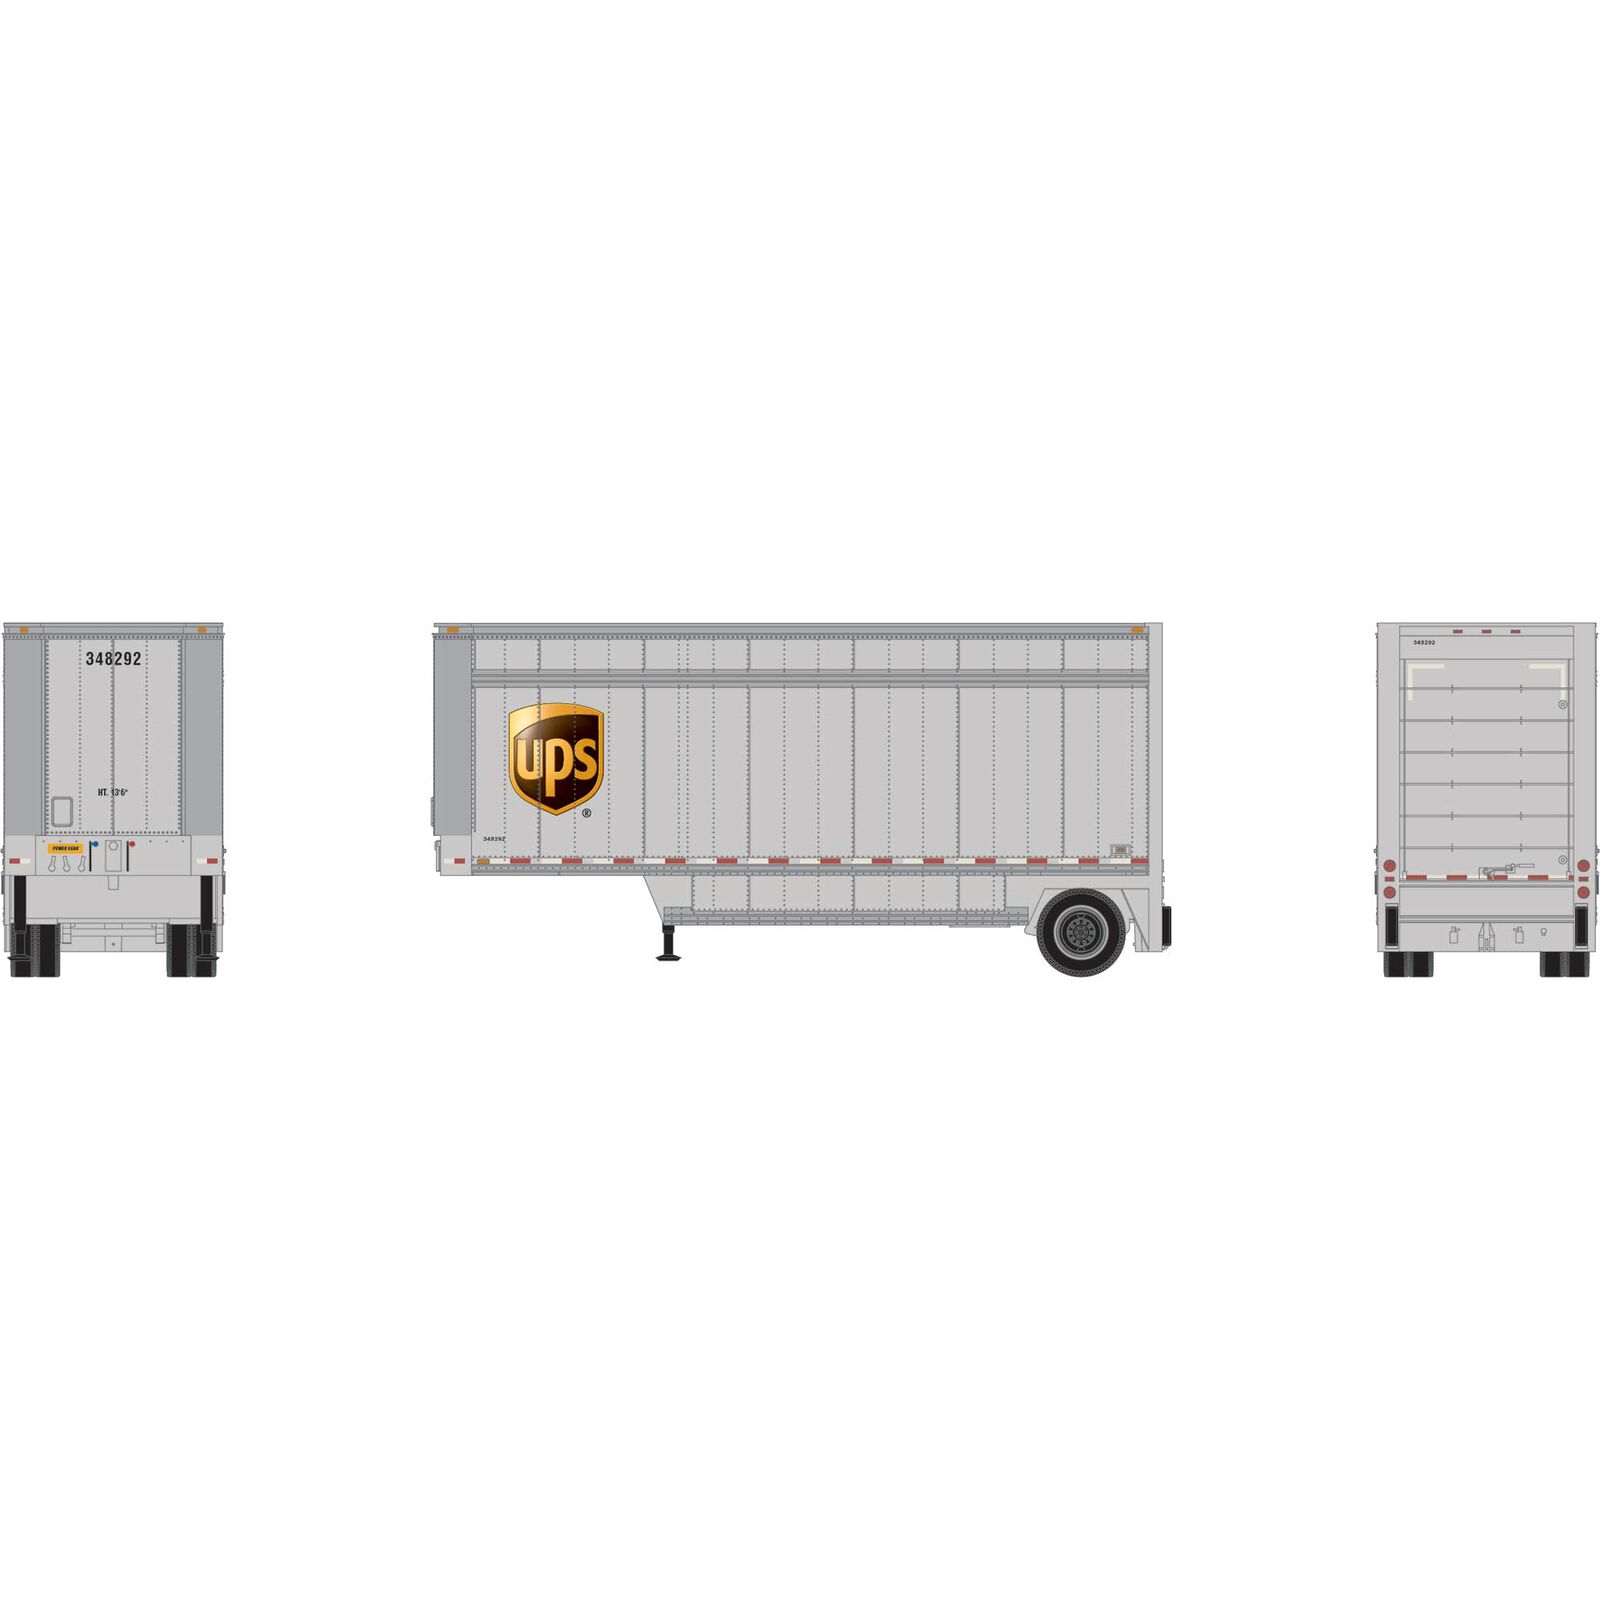 HO RTR 28' Drop Sill Trailer UPS with Shield #348292